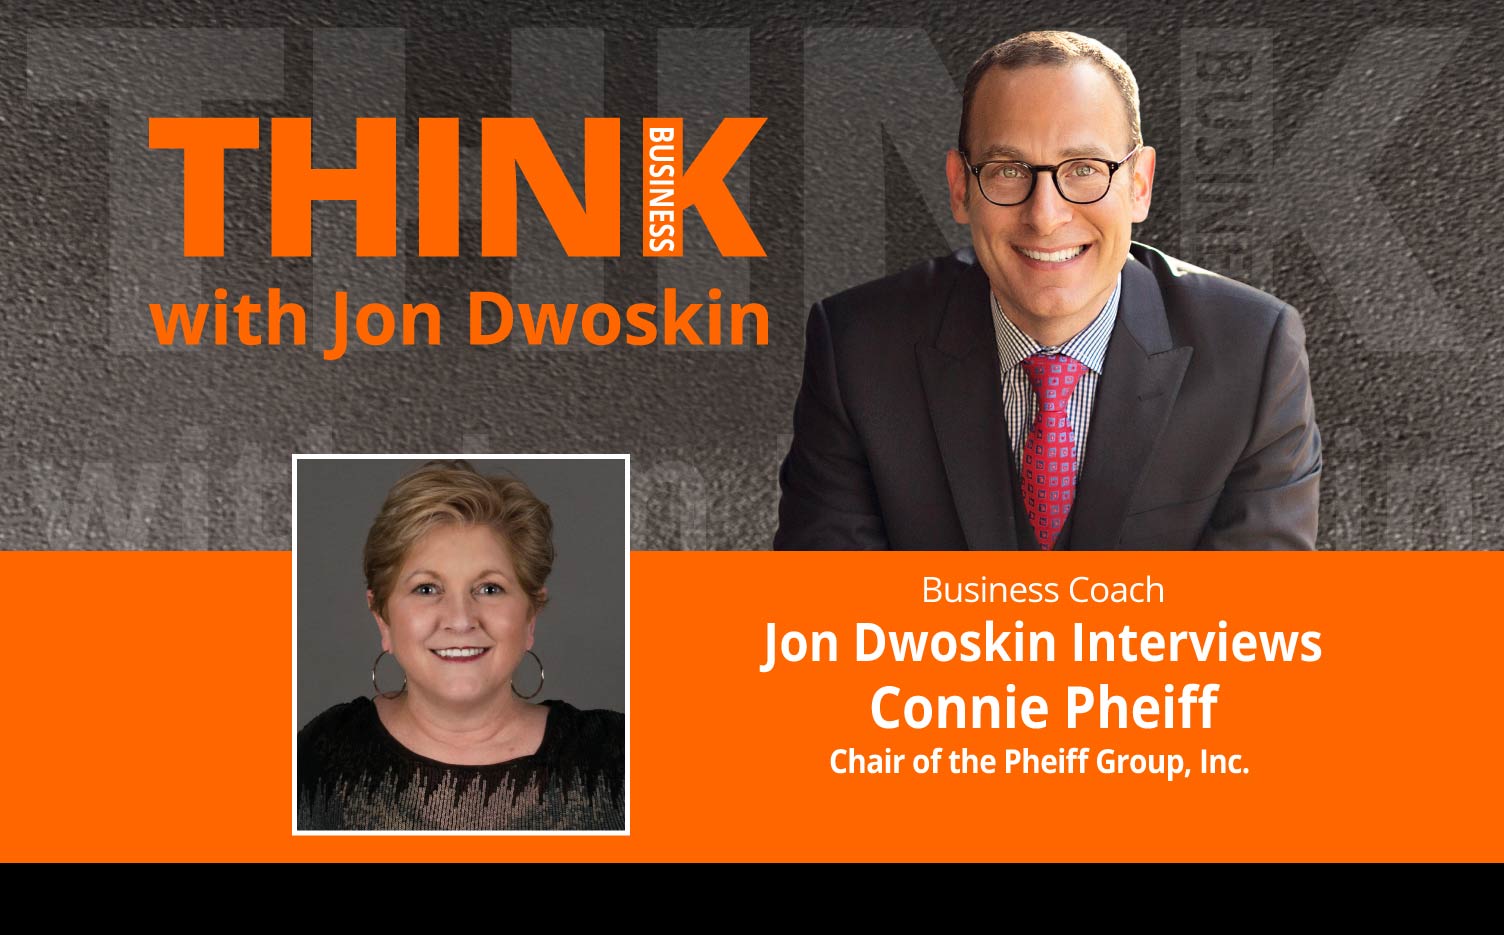 THINK Business Podcast:  Jon Dwoskin Interviews Connie Pheiff, Chair of Pheiff Group, Inc.